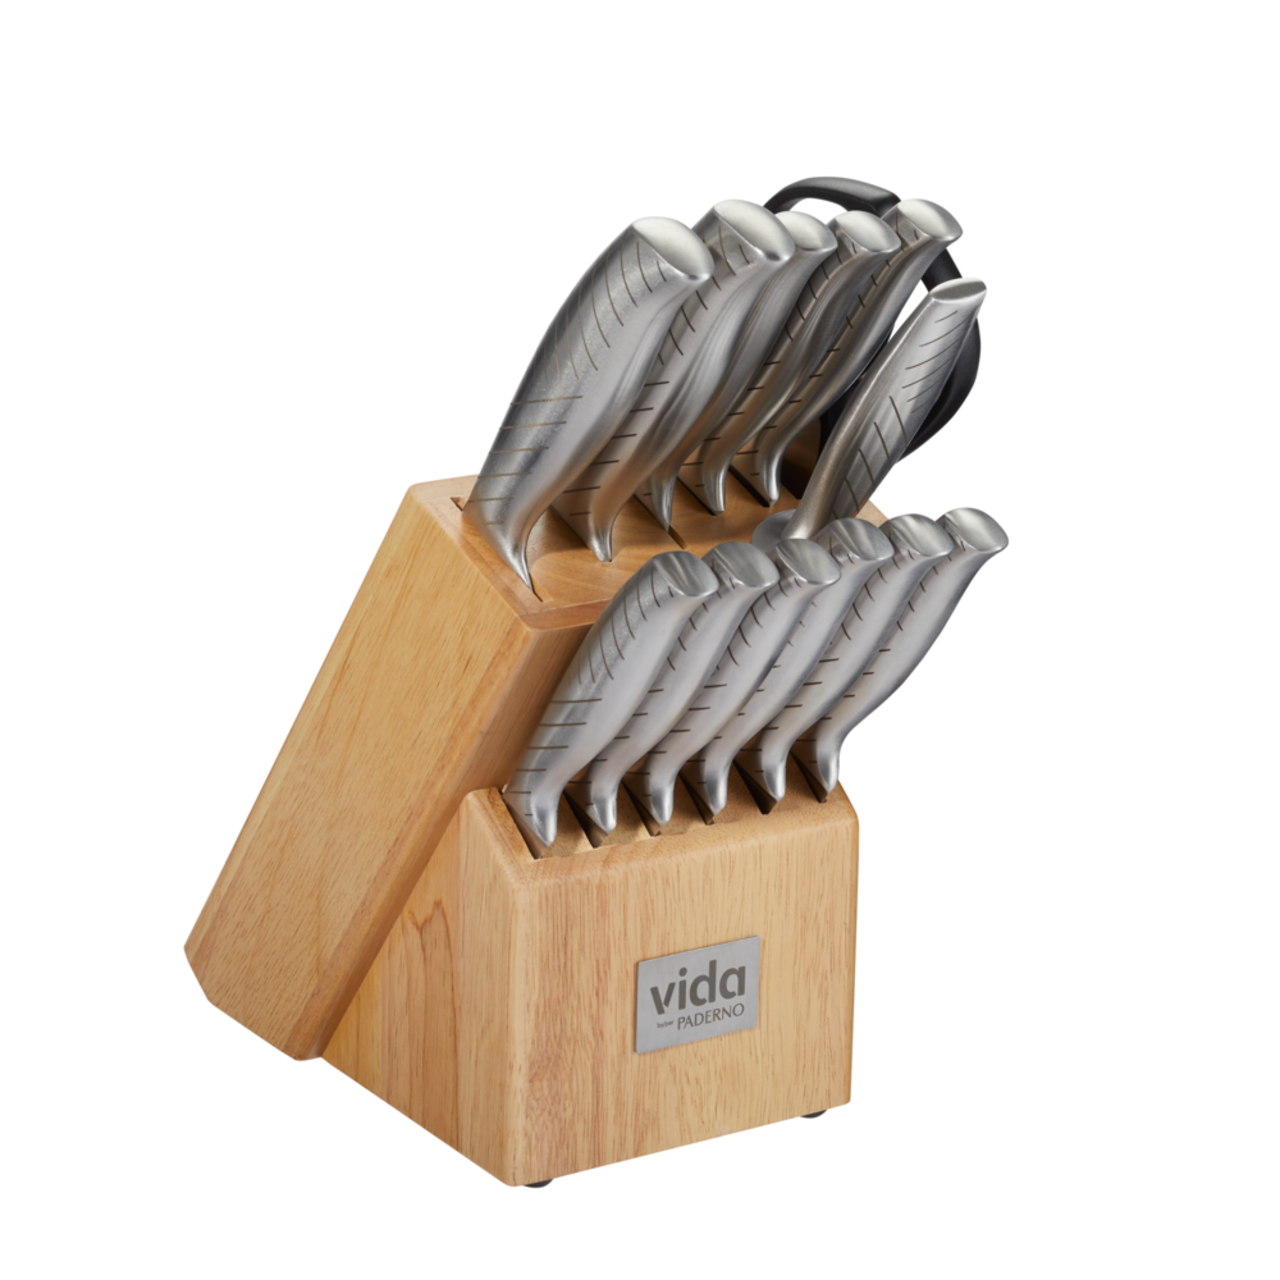 Review: Chicago Cutlery 18-Piece Knife set with Sharpener: Seeds Review 